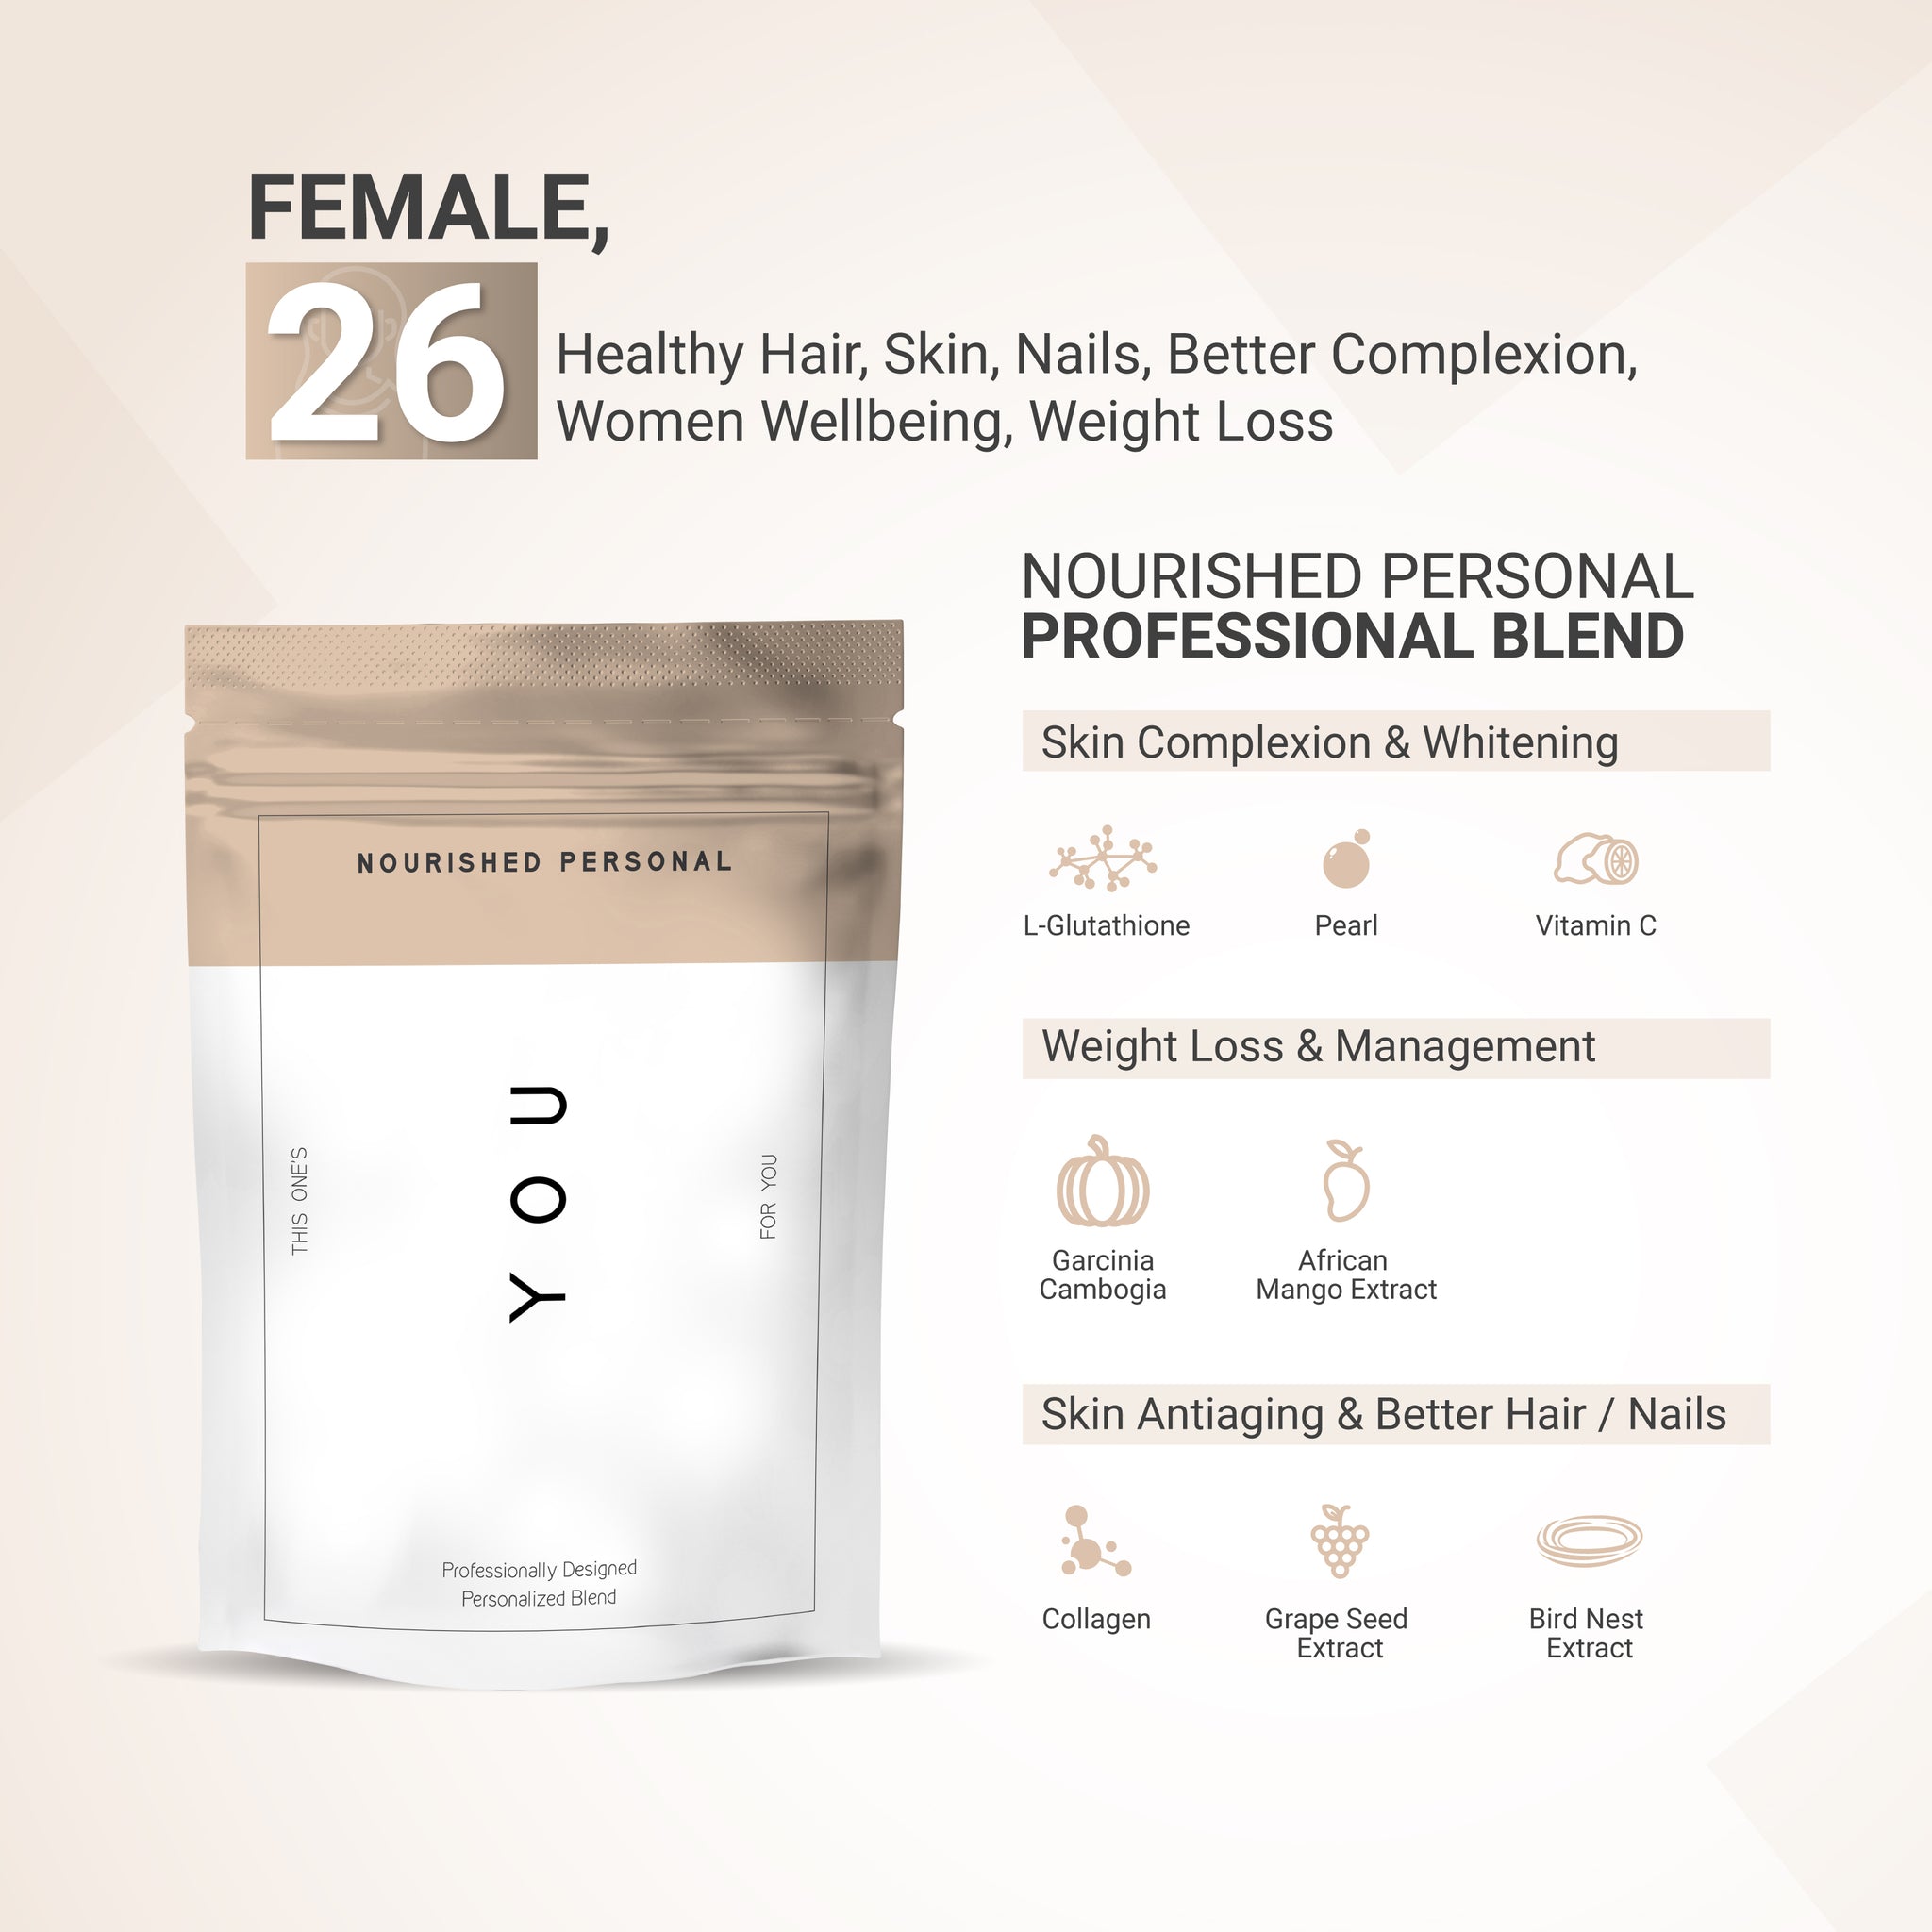 Case Study 3: Female, 26 - Skin Complexion, Weight Management, Skin Antiaging